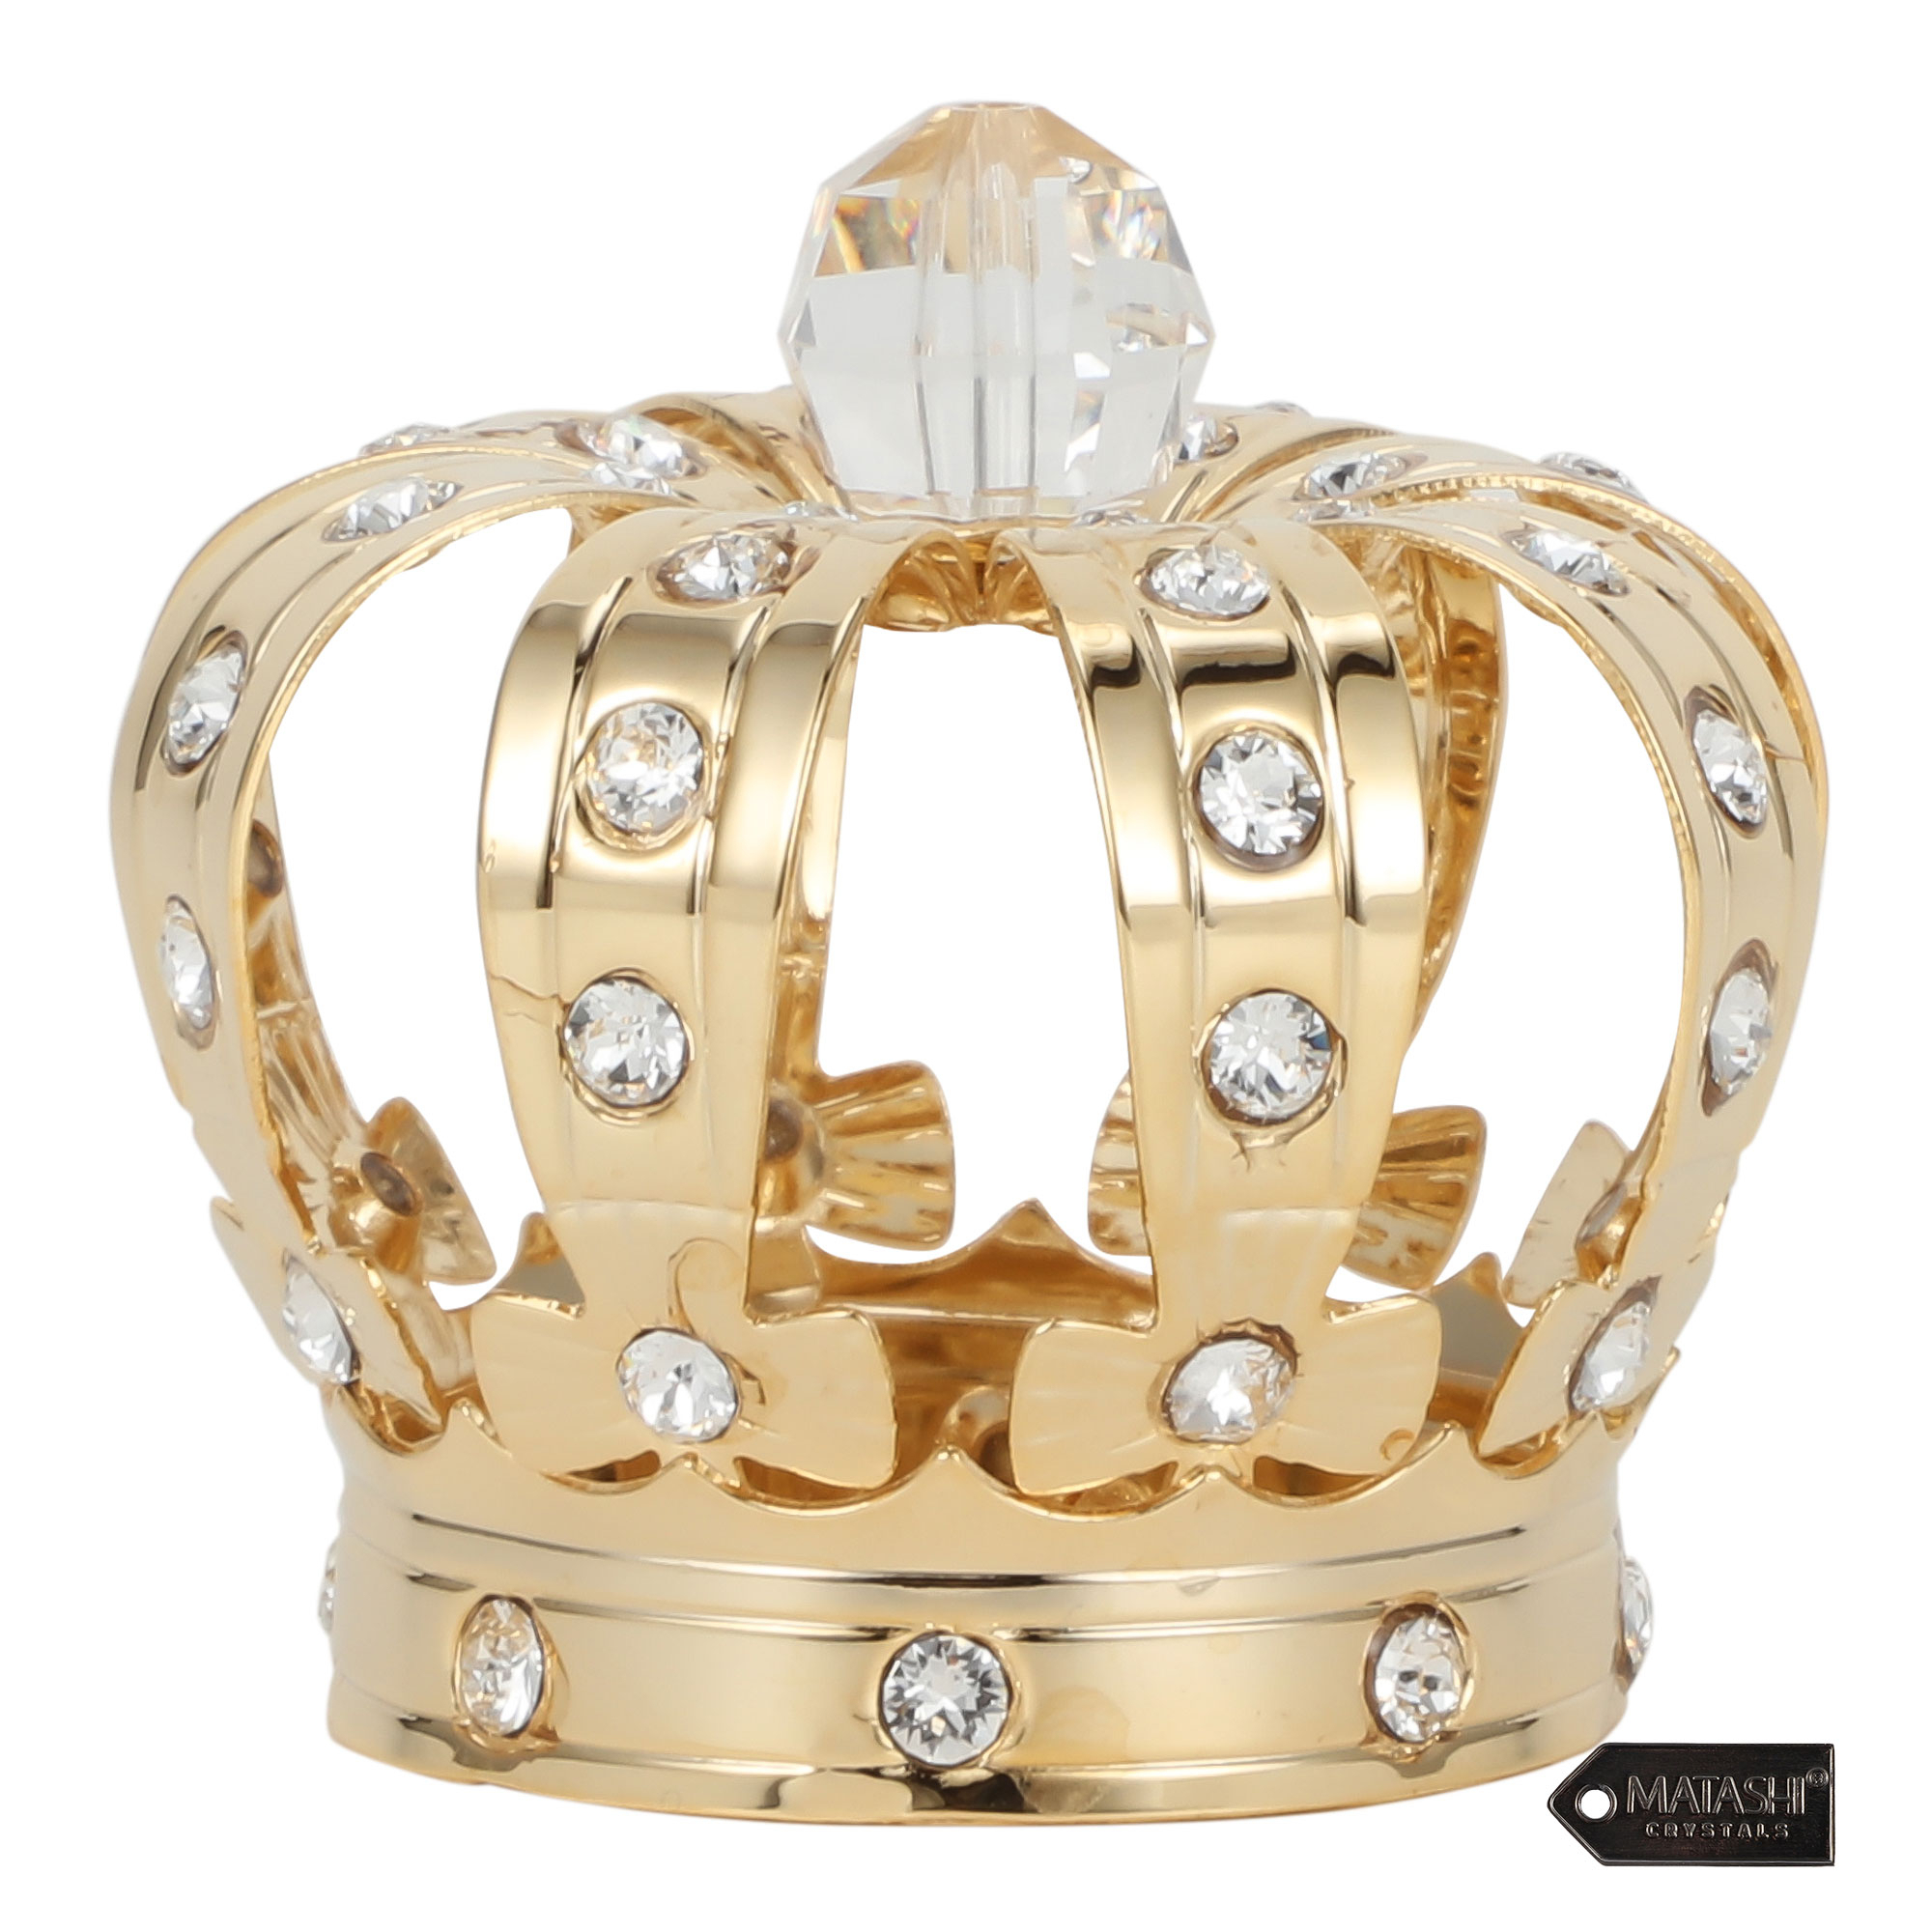 24K Gold Plated Crystal Studded Crown Ornament With Velvet Pouch By Matashi